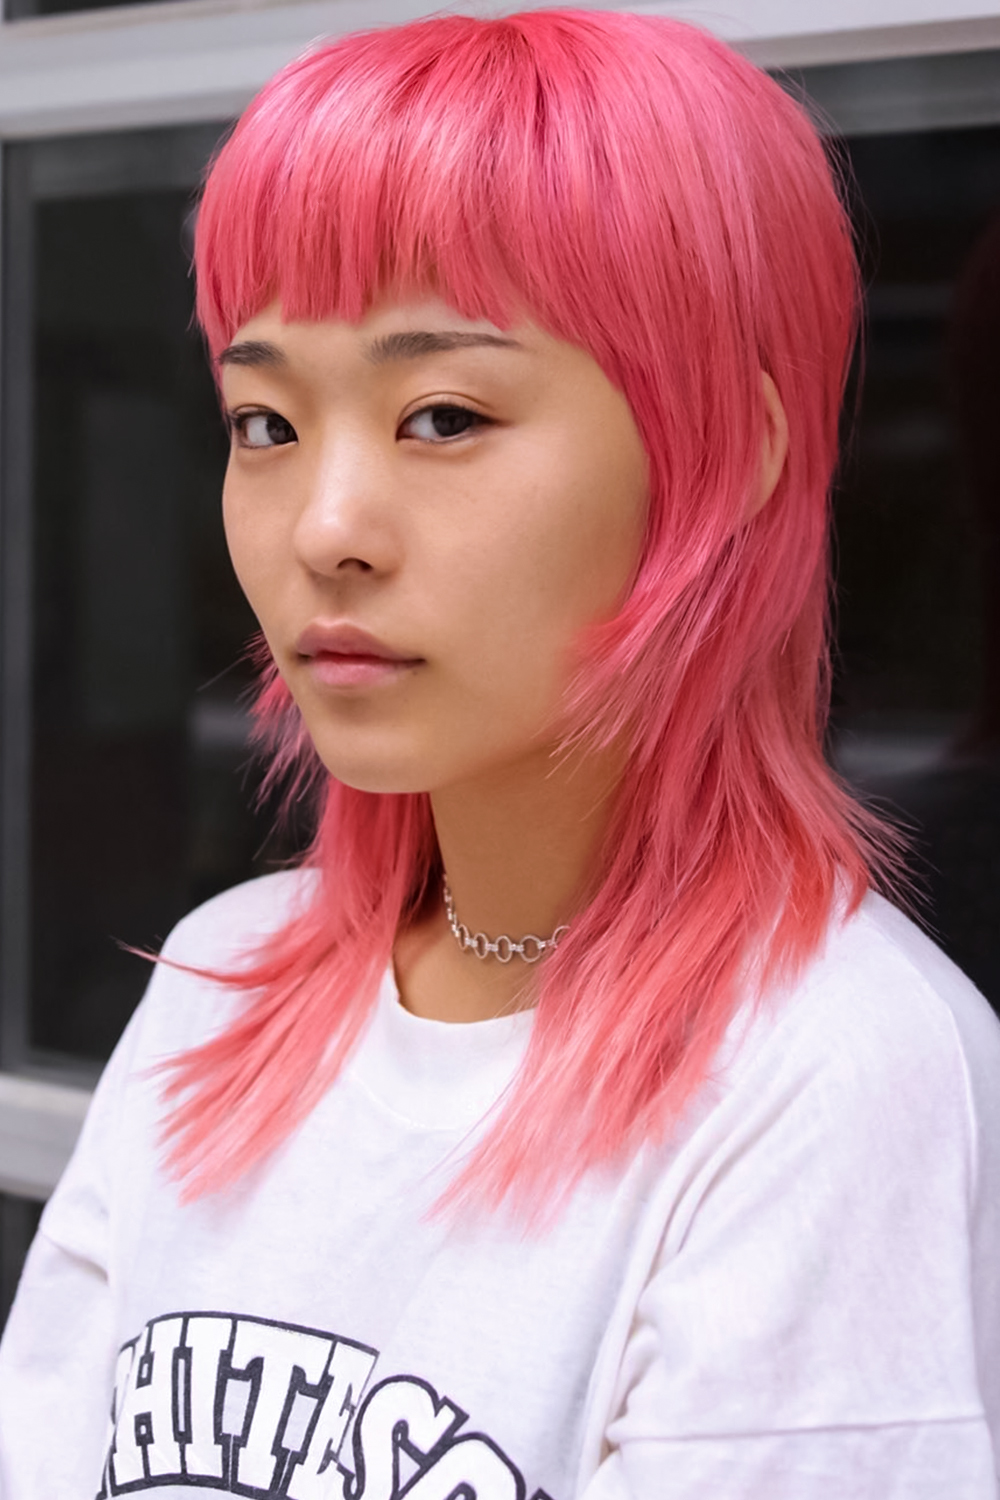 woman with dyed edgy mullet haircut is posing